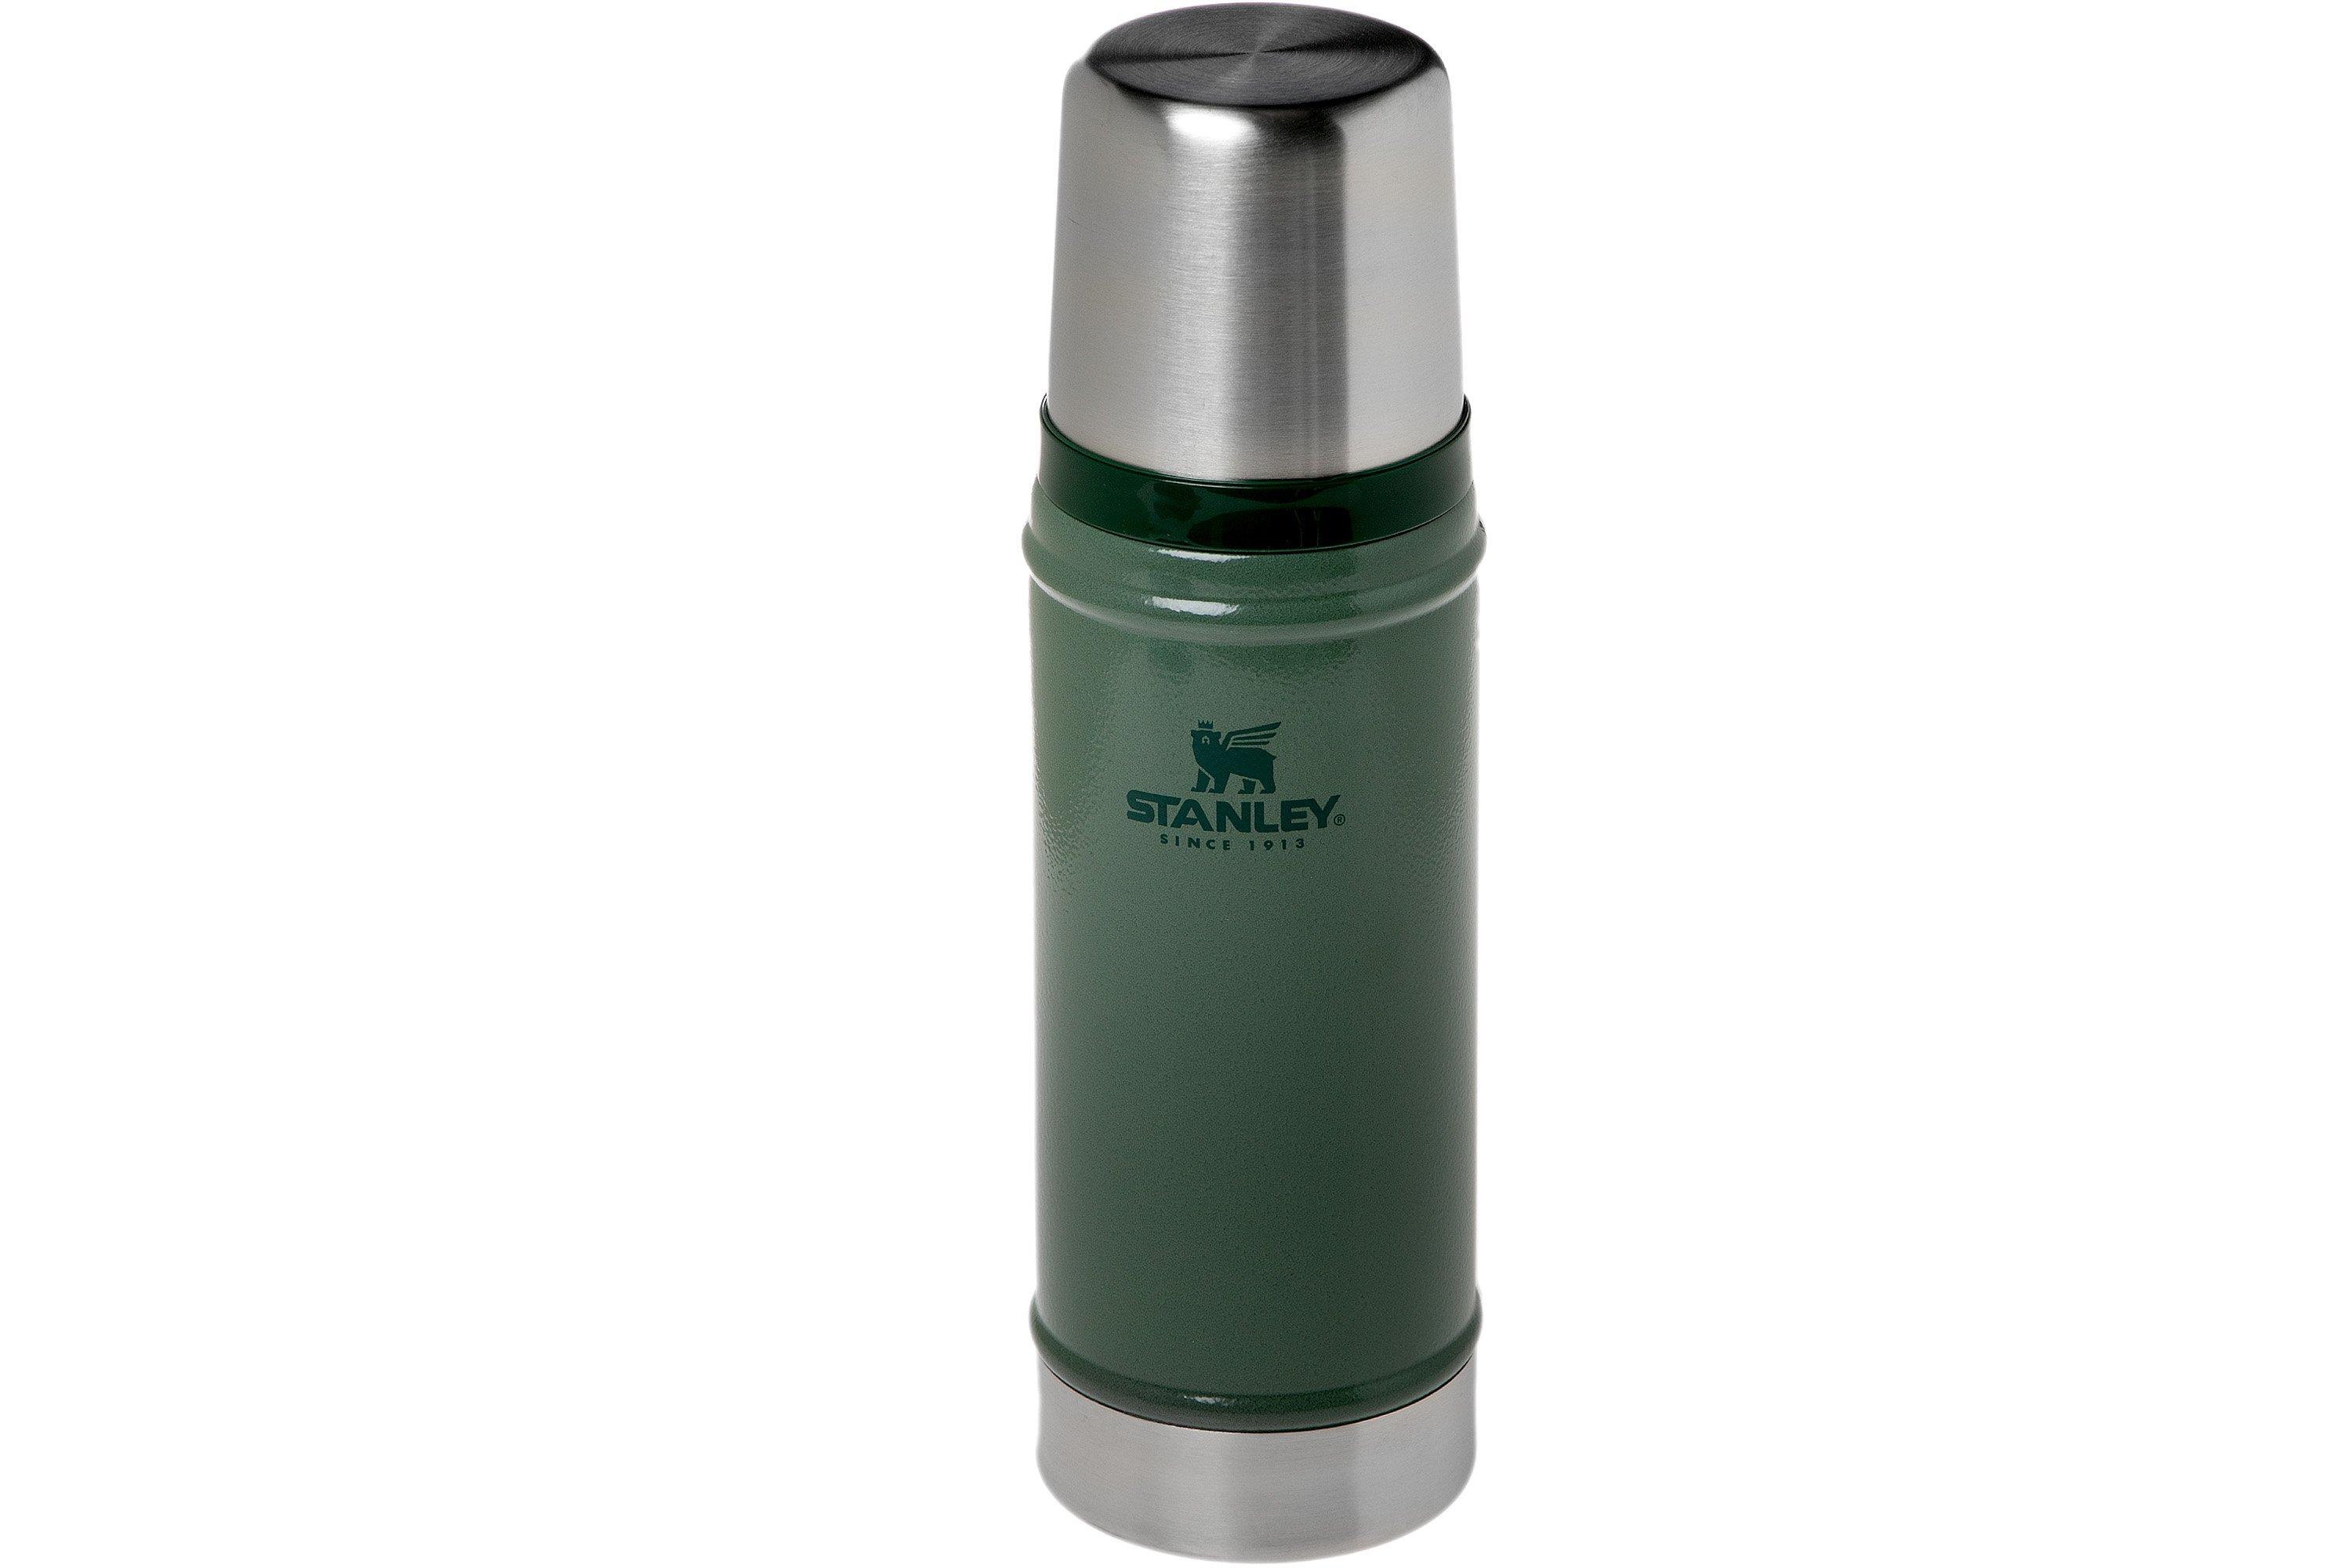 Master diploma Depressie Minachting Stanley PMI The Legendary Classic Thermos 470 ml - Hammertone Green |  Advantageously shopping at Knivesandtools.com